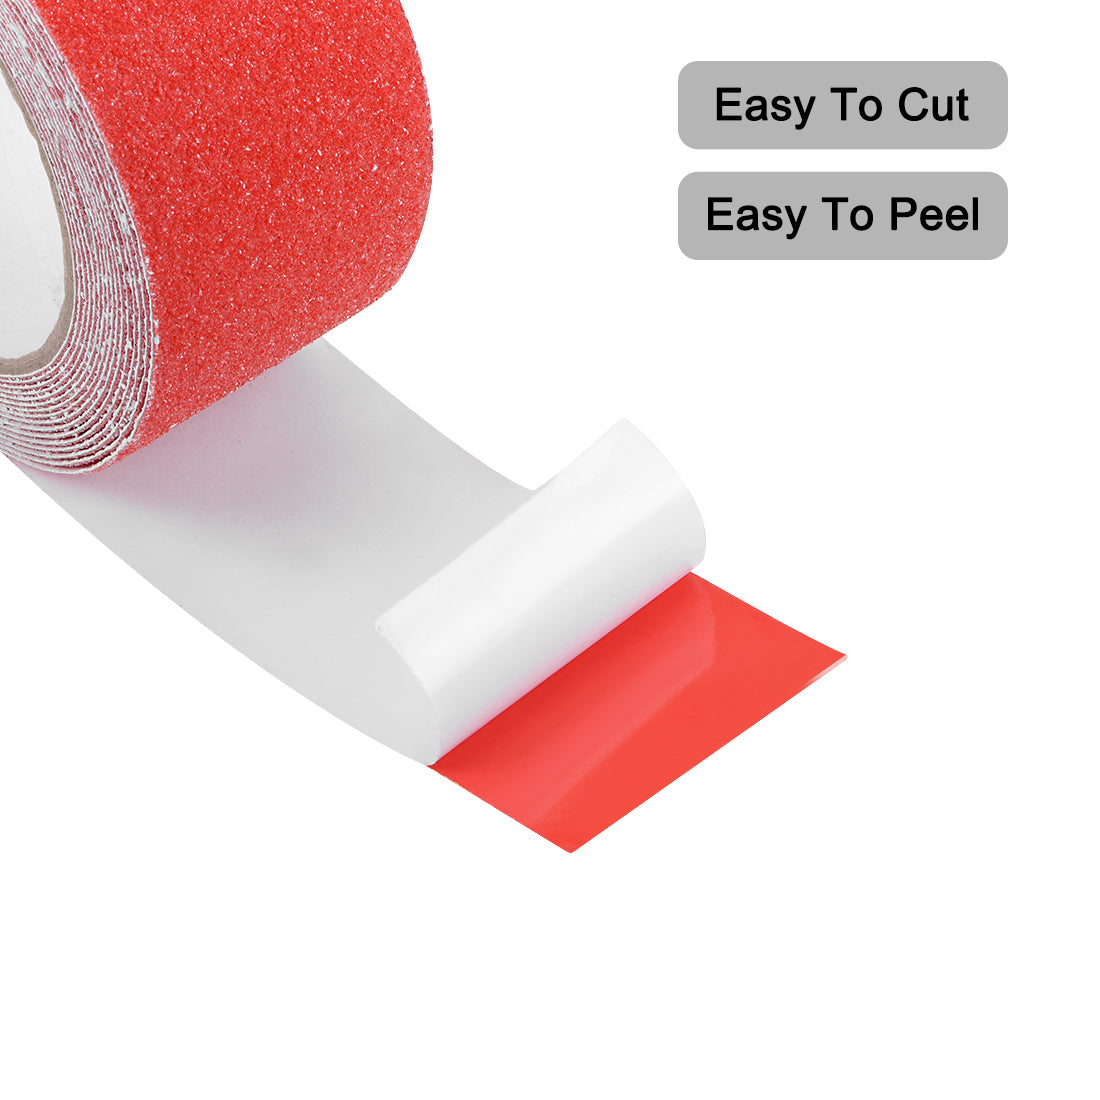 uxcell Uxcell Anti Slip Traction Grip Tape, 80 Grit Frosted Surface PVC Warning Tape Waterproof for Steps, 16 Ft x 2 Inch(LxW) Red